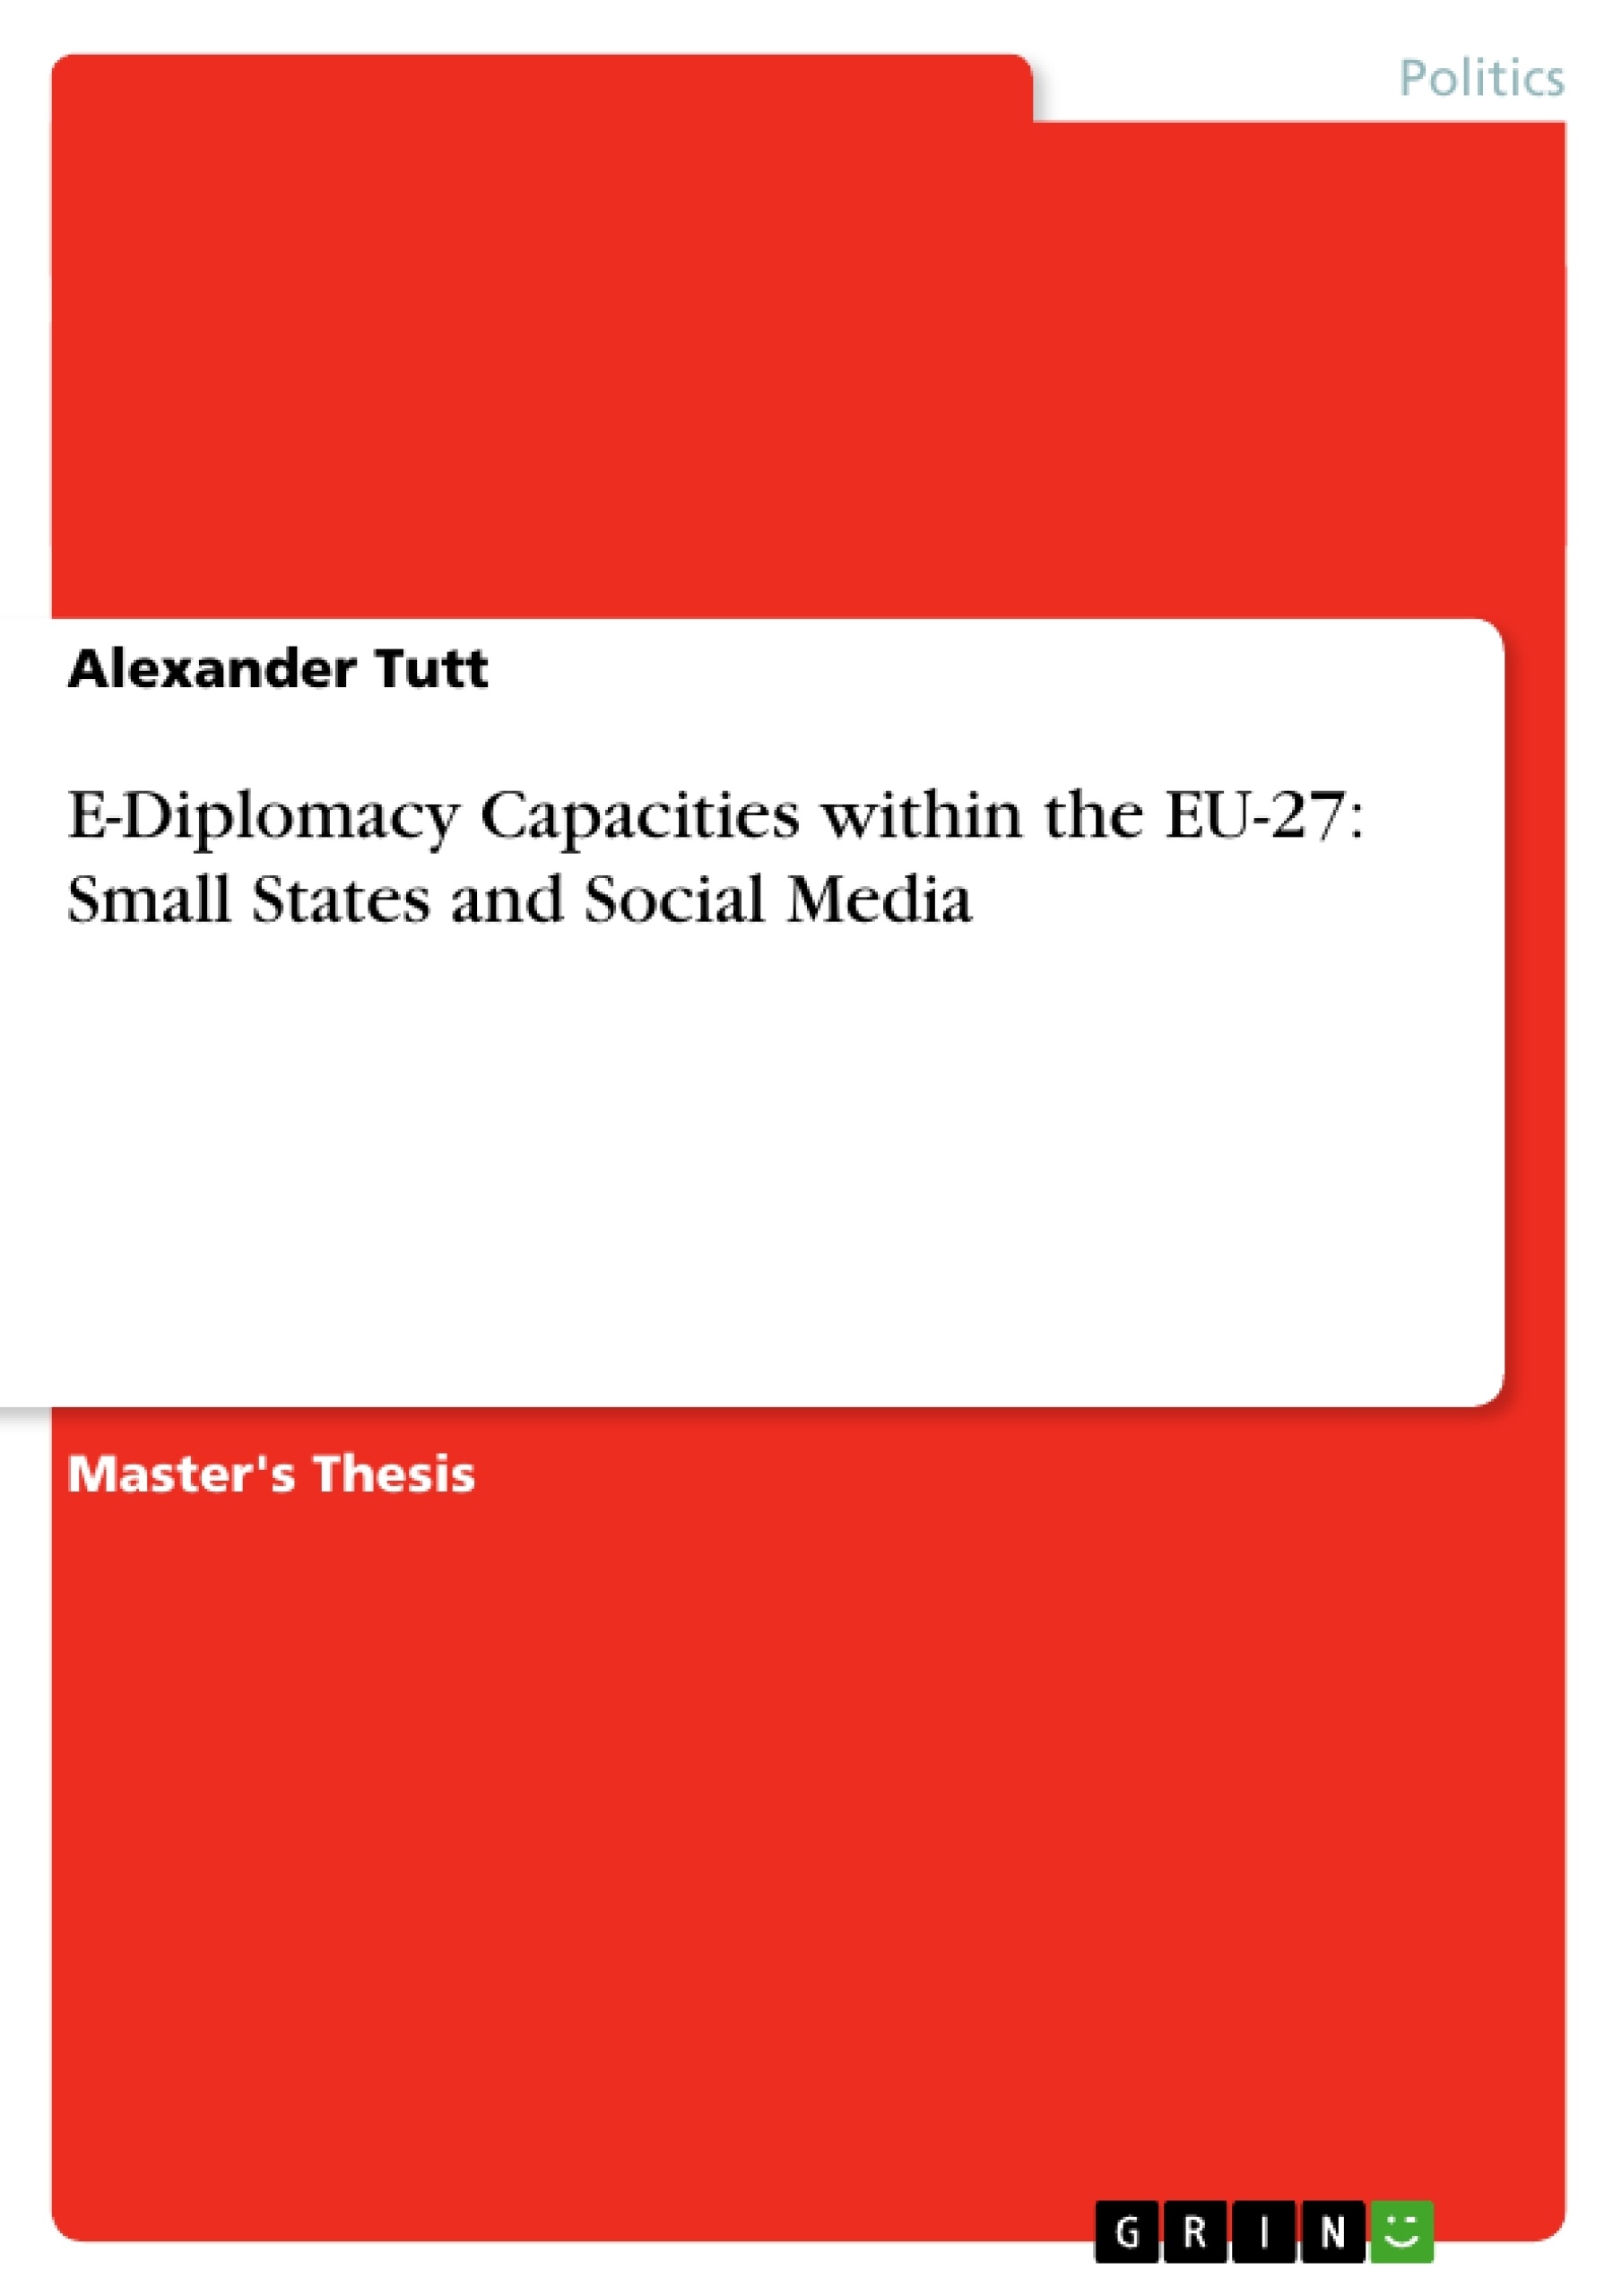 Titre: E-Diplomacy Capacities within the EU-27: Small States and Social Media